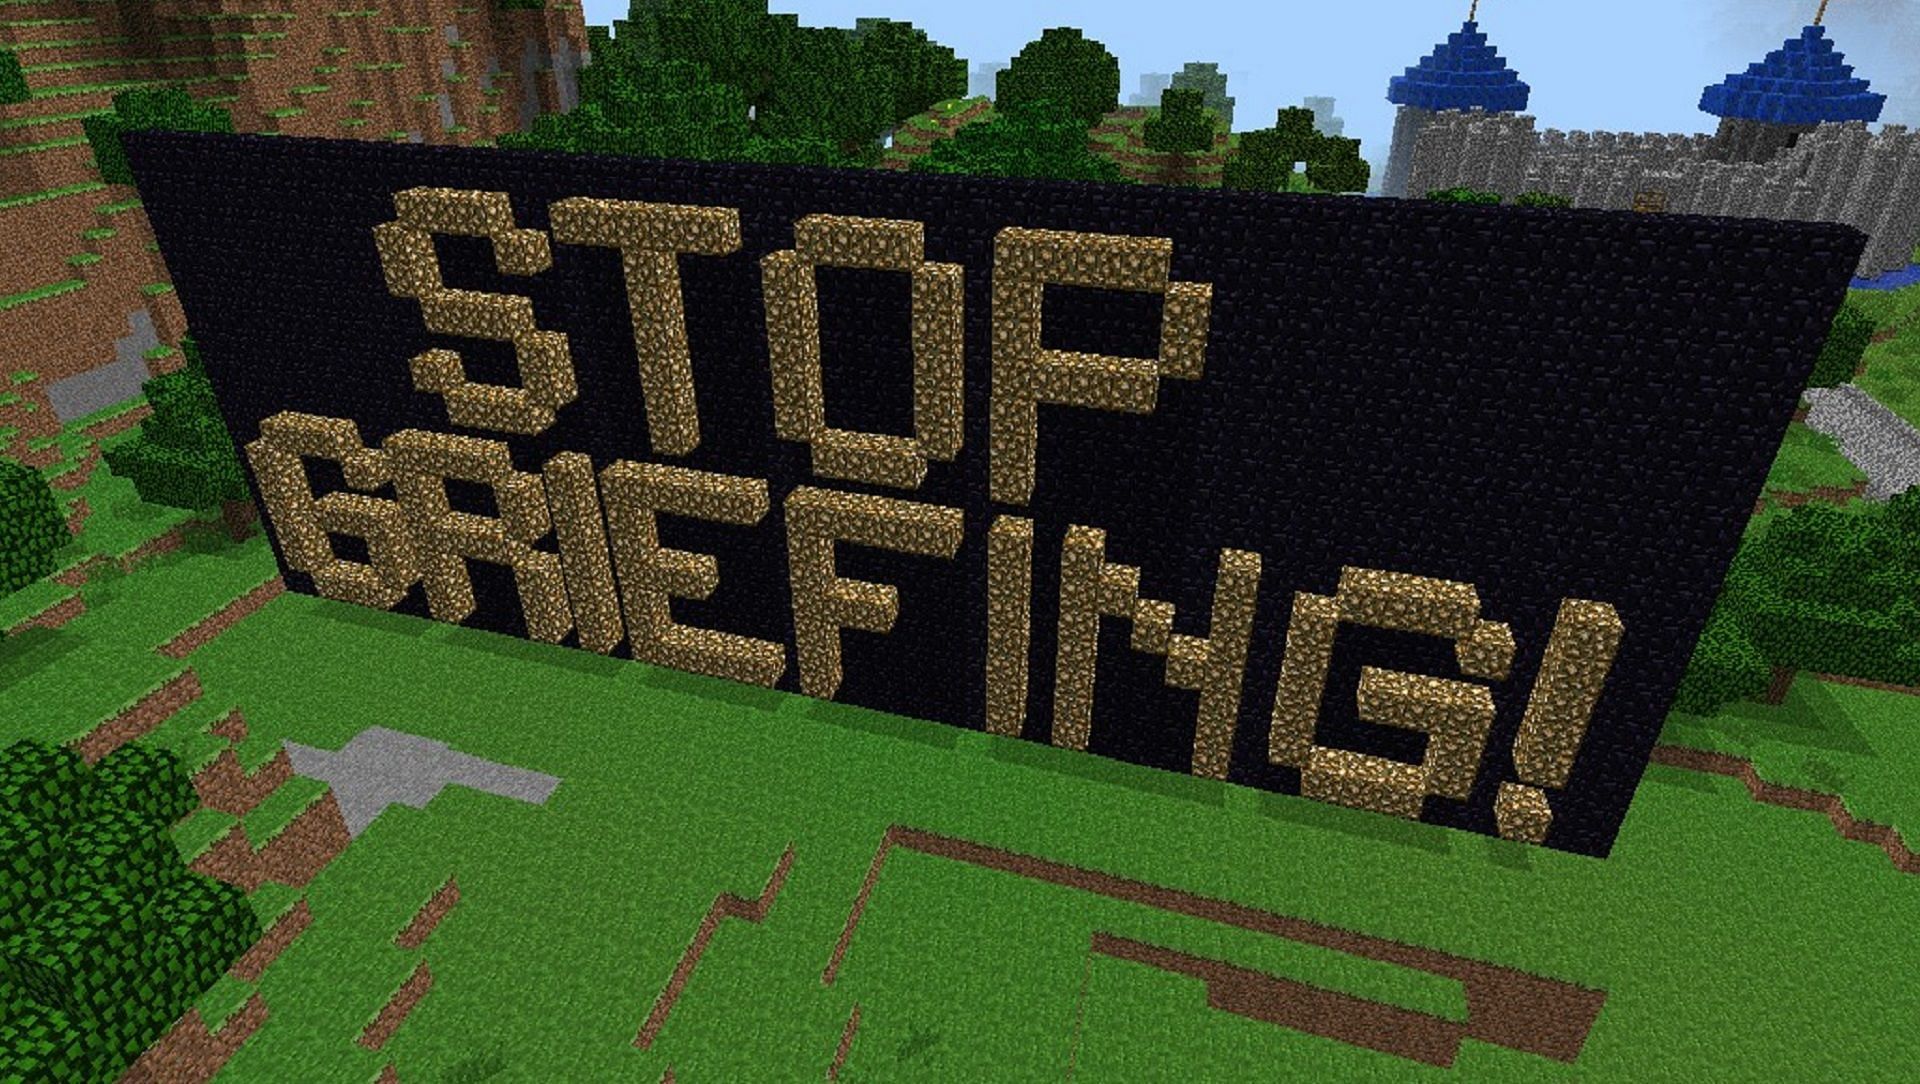 Griefing can be a significant issue on Minecraft servers (Image via Rotom7/Planet Minecraft)